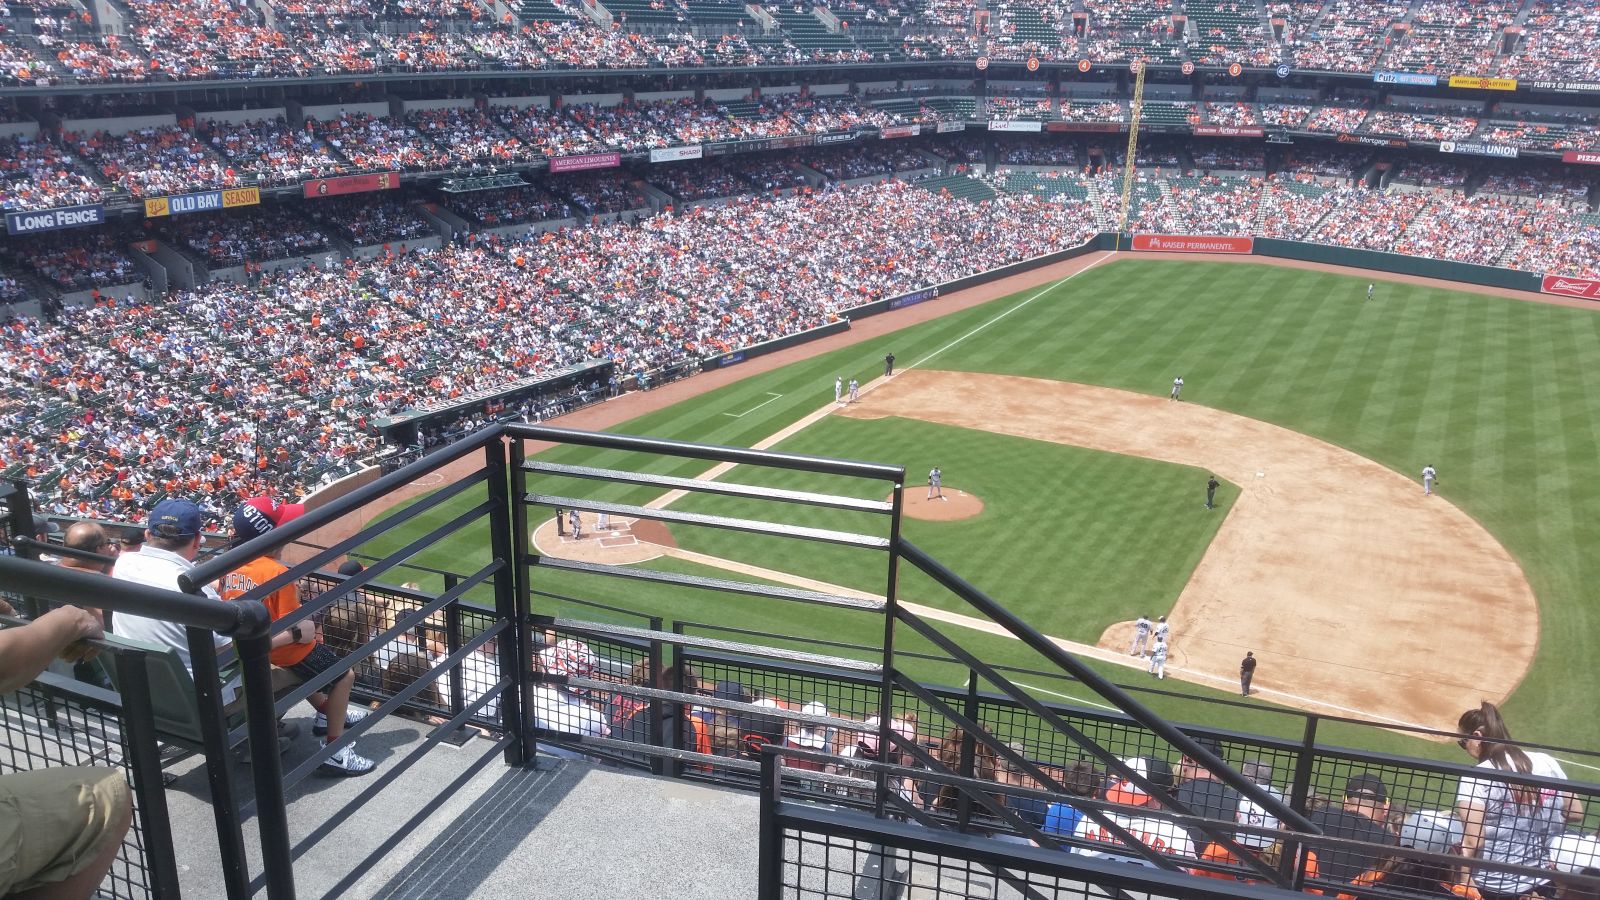 section 318, row 11 seat view  - oriole park